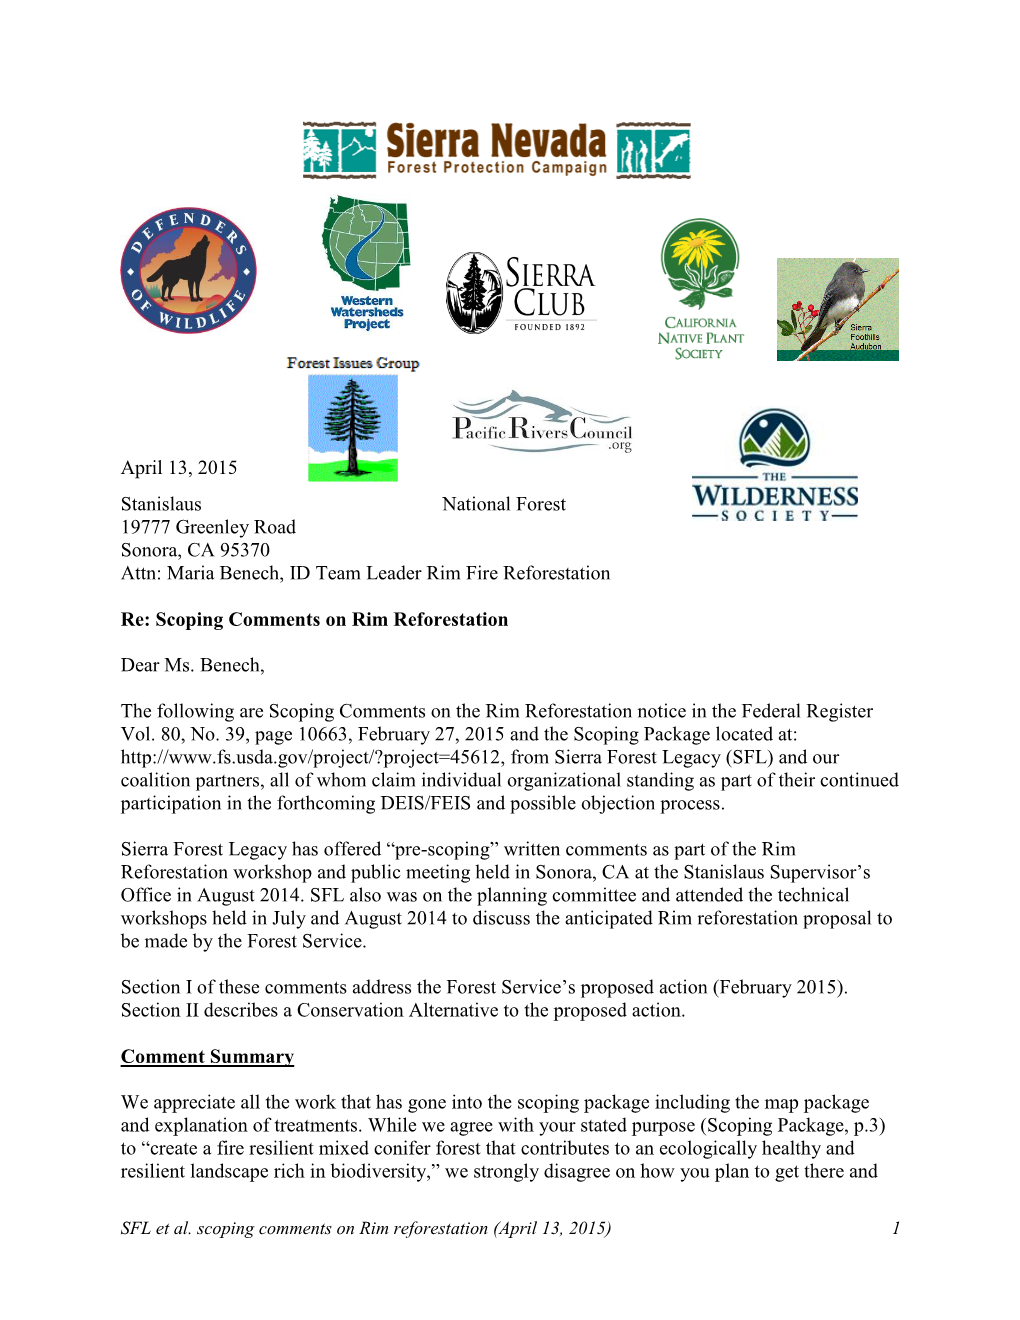 Sierra Forest Legacy and Coalition Comments on Rim Fire Reforestation